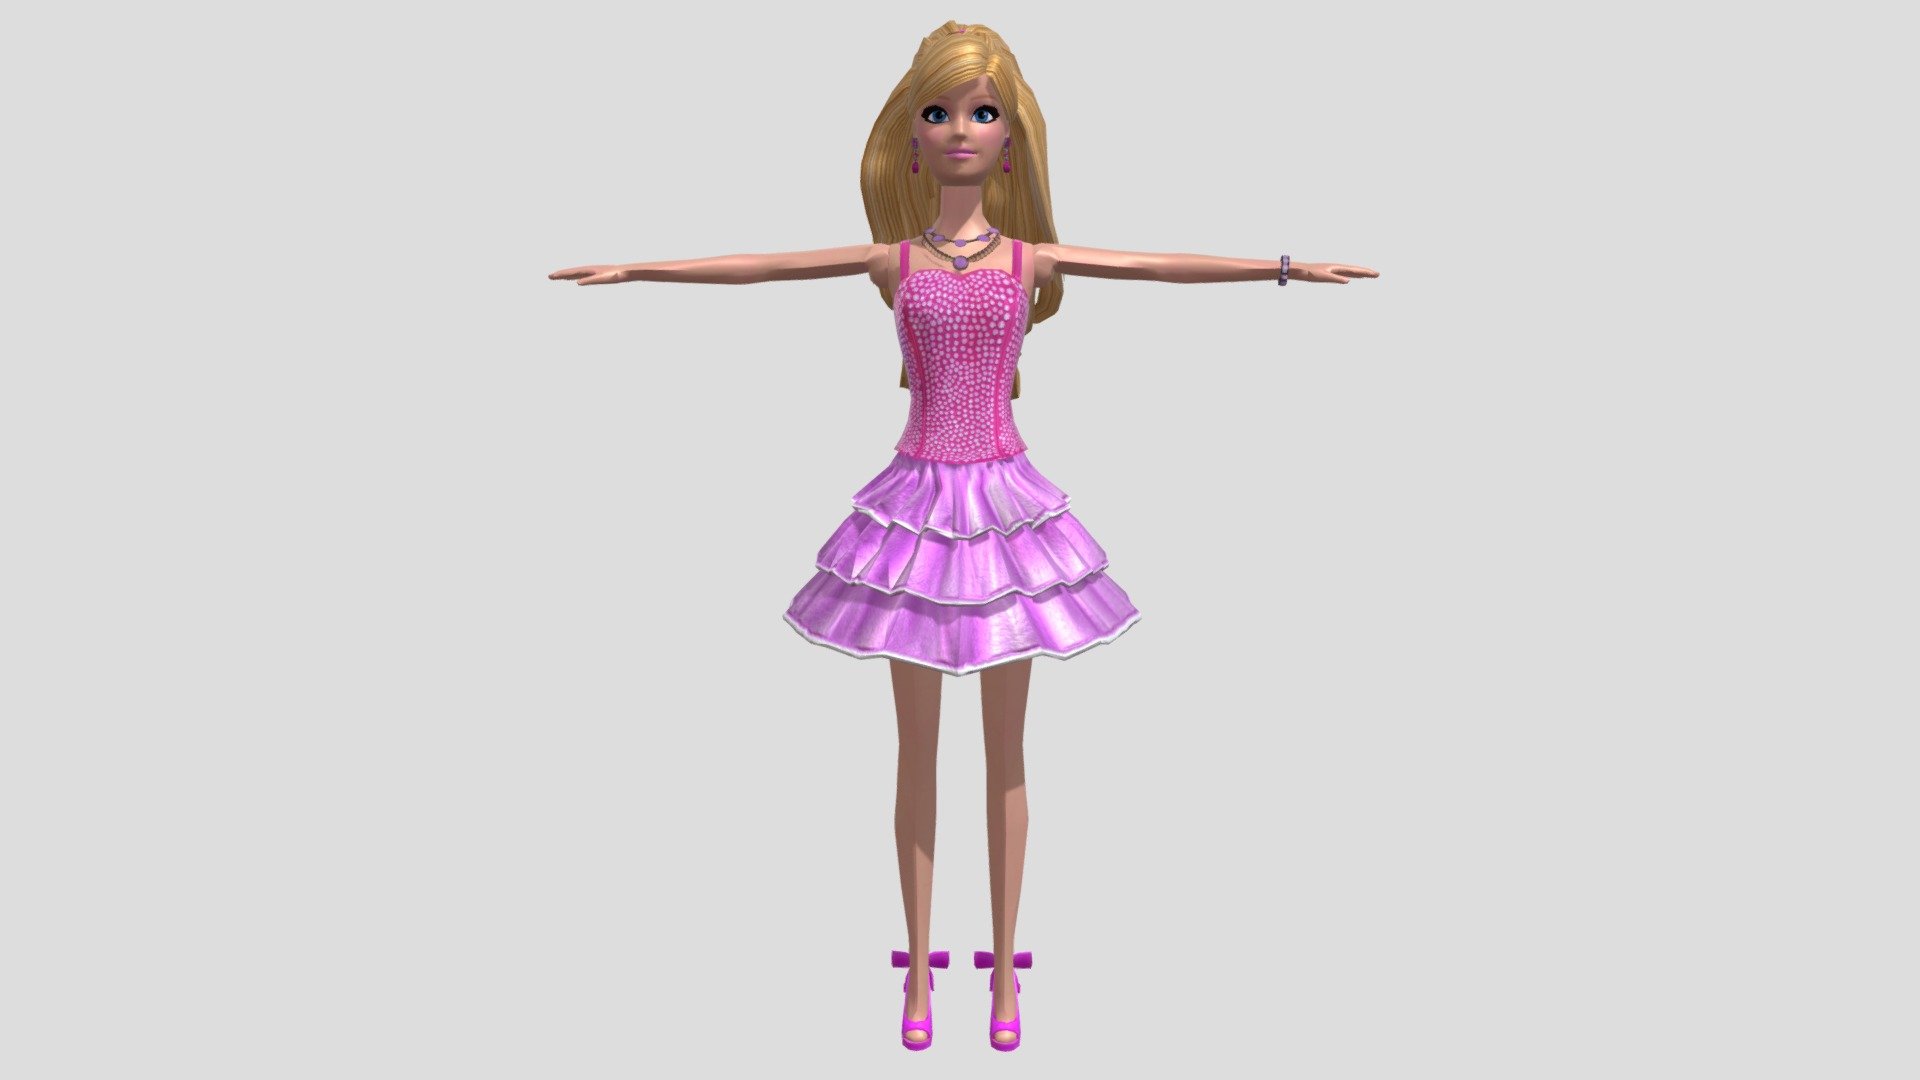 Ripped from the game: Barbie: Life In The Dreamhouse (PC/Computer)

DeviantArt: https://www.deviantart.com/cameroncarson/art/Barbie-Download-932072269

The Models Resource: SOON - BARBIE - 3D model by Cameron Carson Official (@CameronCarson) 3d model